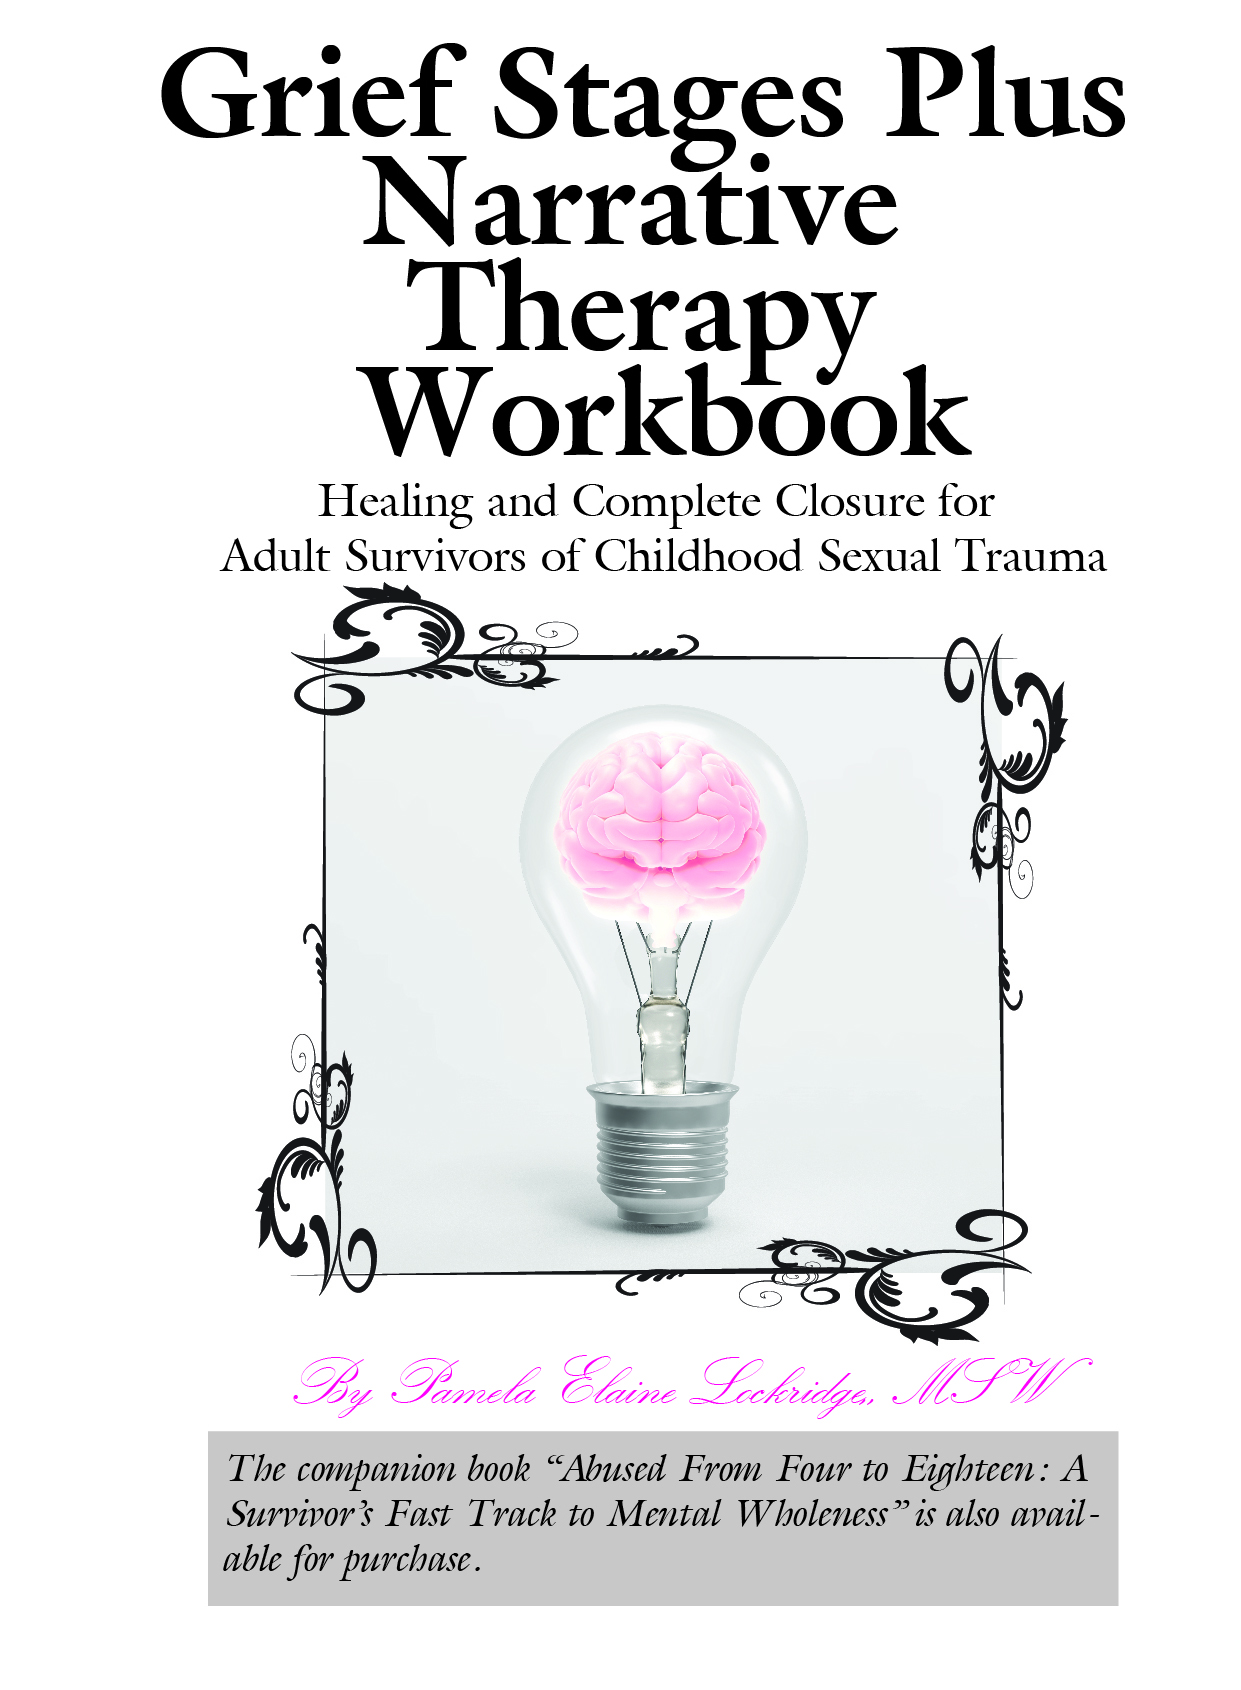 FREE BOOK "Abused from Four to Eighteen: A Survivor's Fast-Track to Mental Wholeness" when you purchase the workbook entitled "Grief Stages Plus Narrative Therapy Workbook "  for $20 + $5 shipping